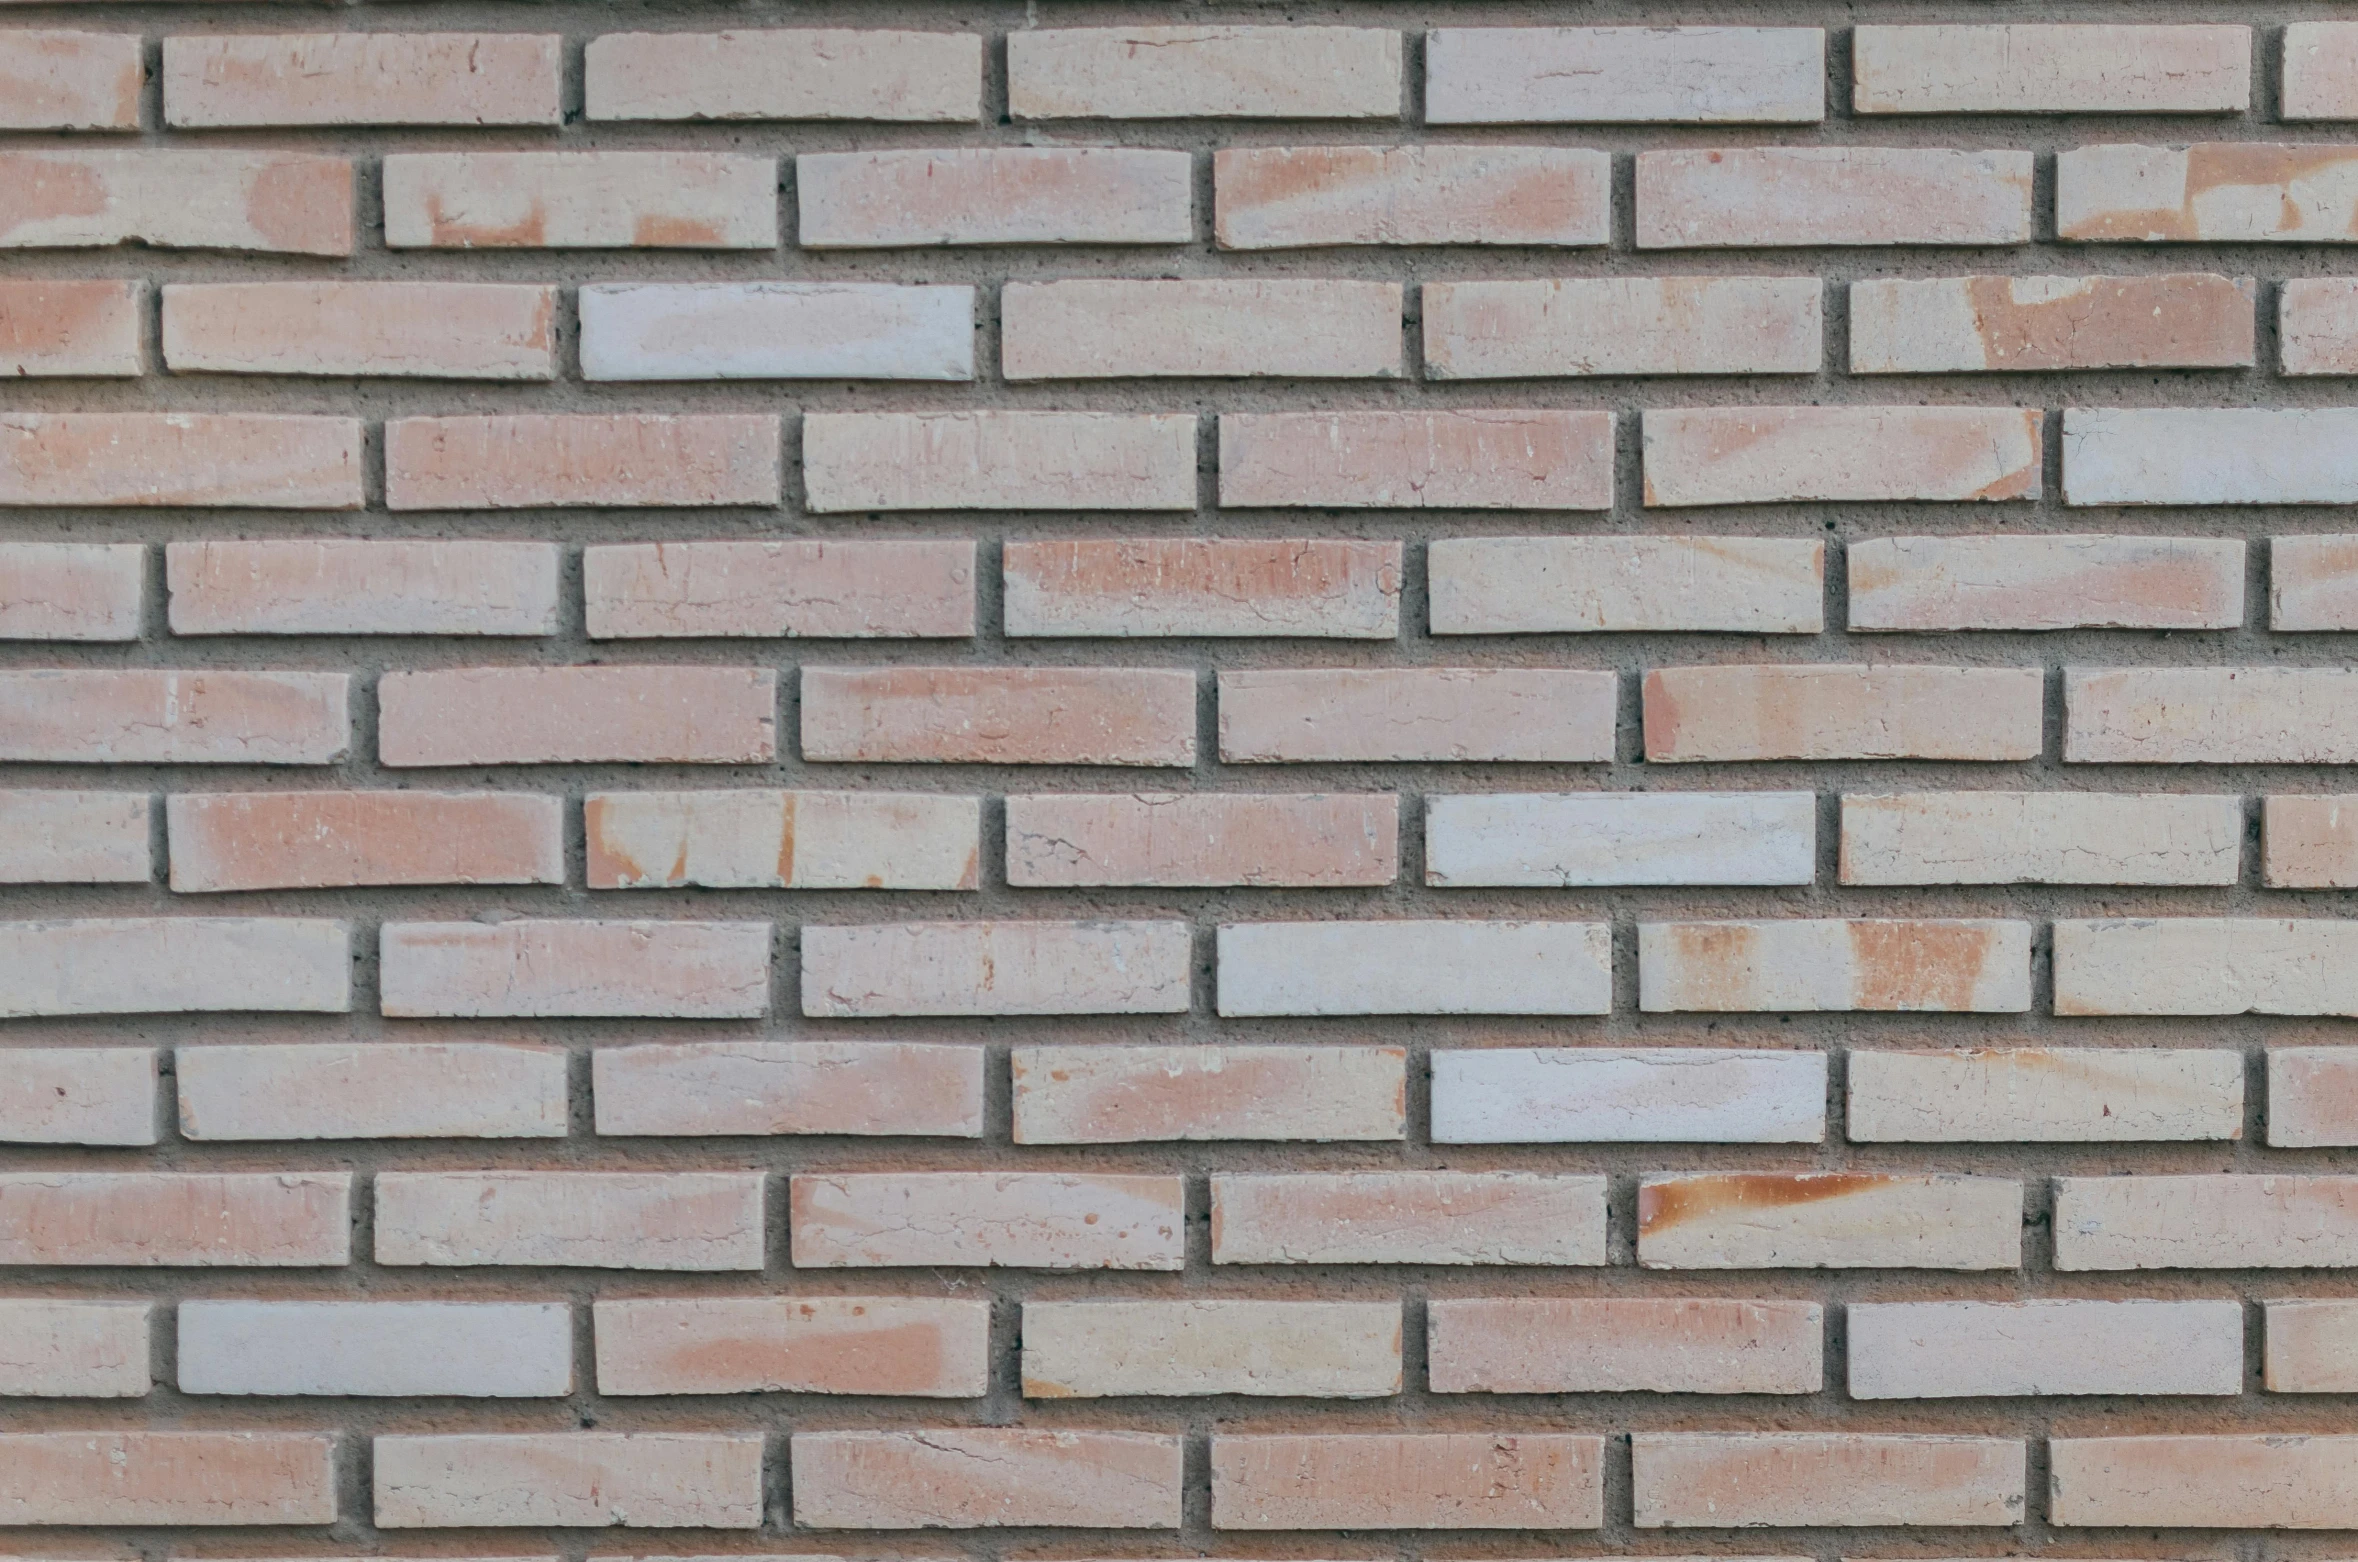 a fire hydrant in front of a brick wall, by Andries Stock, roofing tiles texture, light blush, rectangular, stone facade